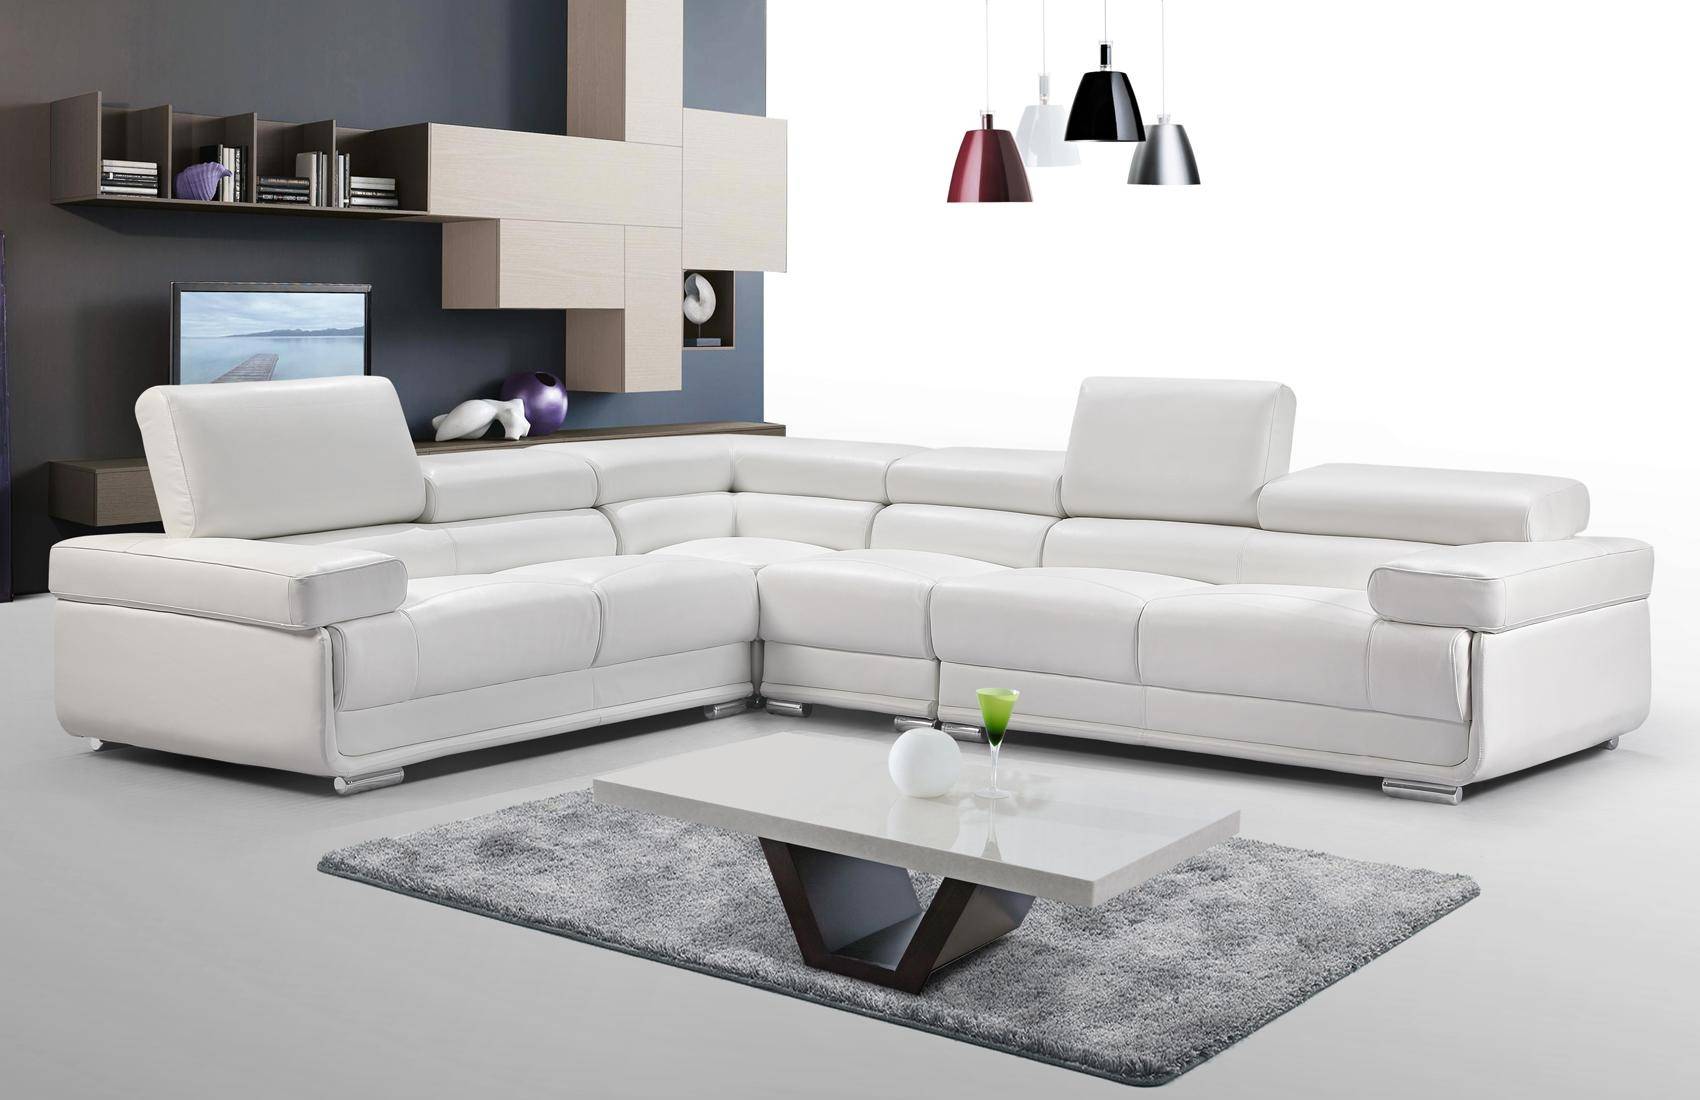 Esf 2119 Sectional Sofa In White, White Leather Sofa Sectionals Contemporary